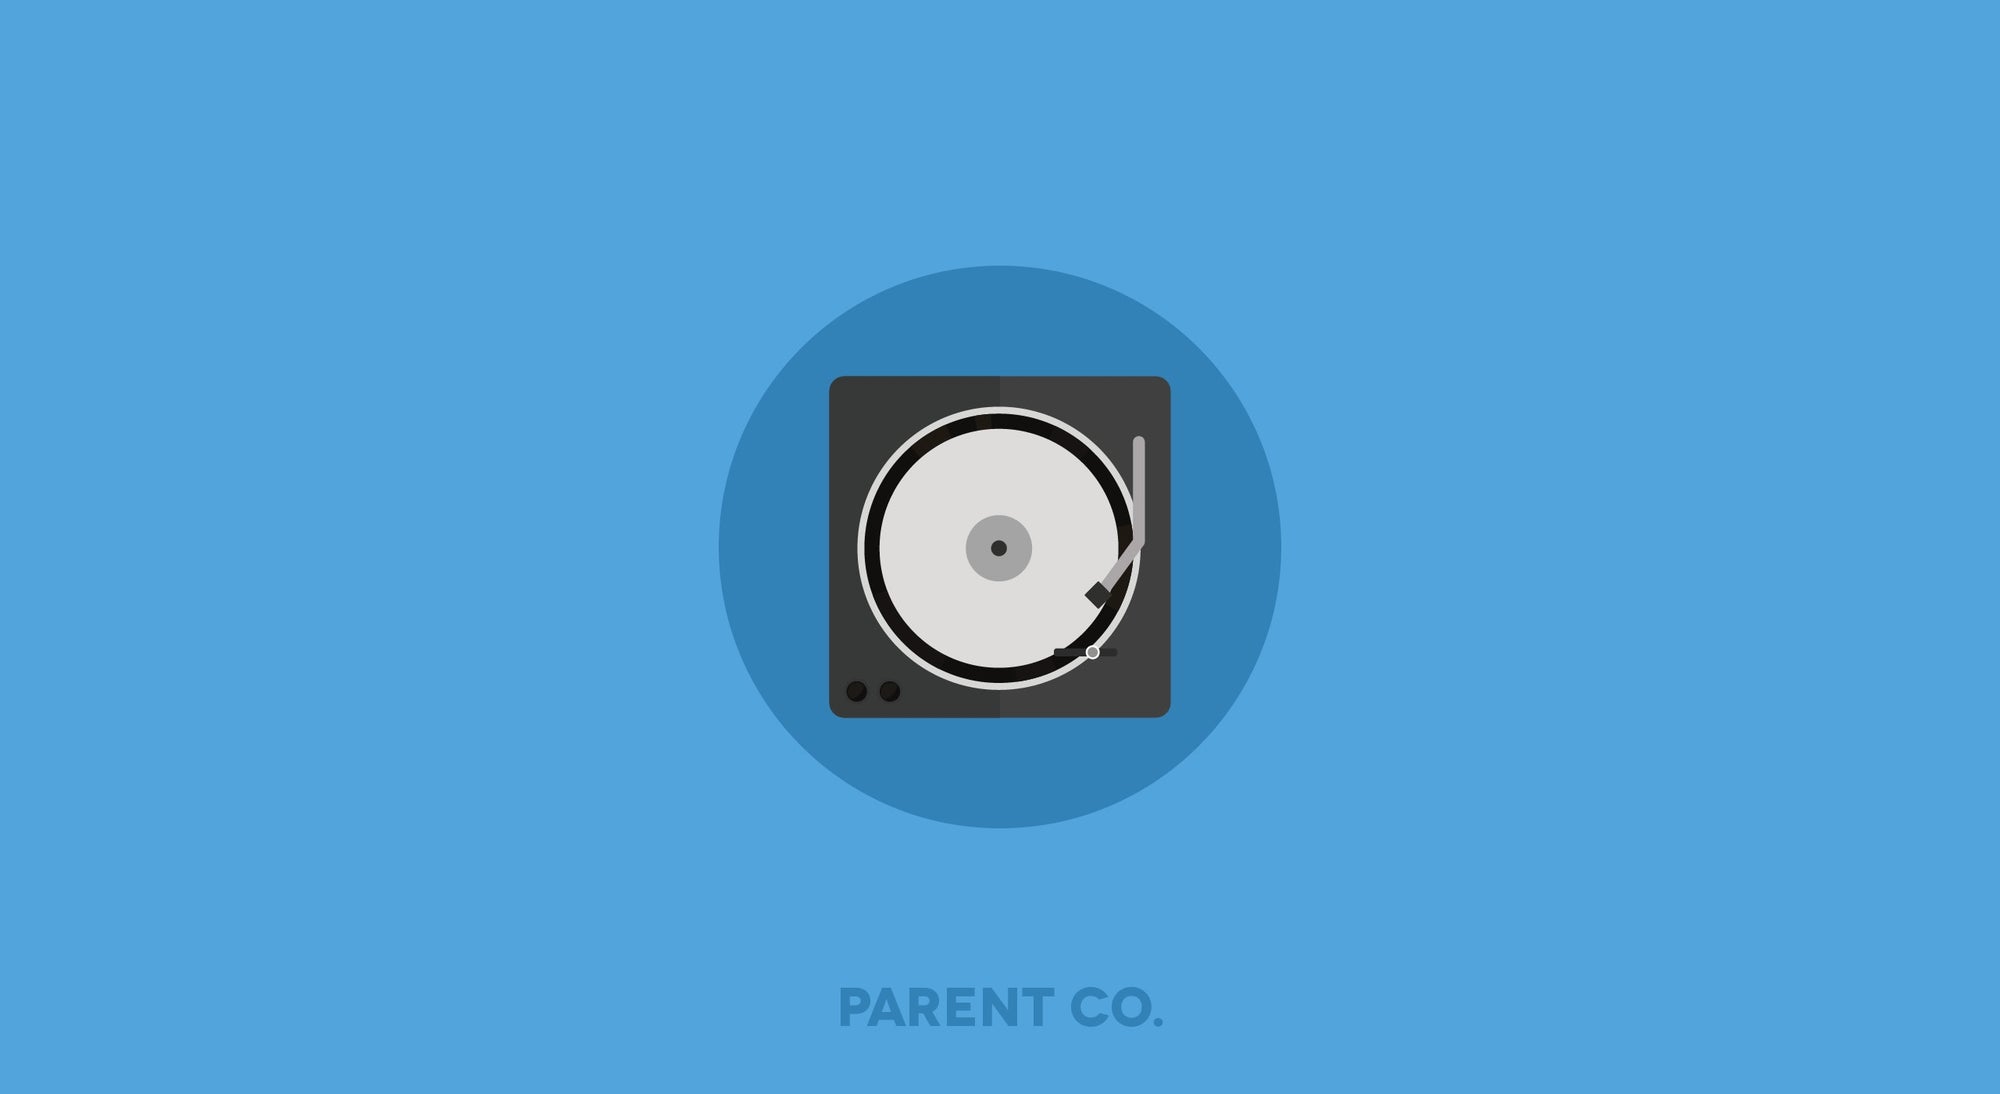 icon of record plater with parent.co logo